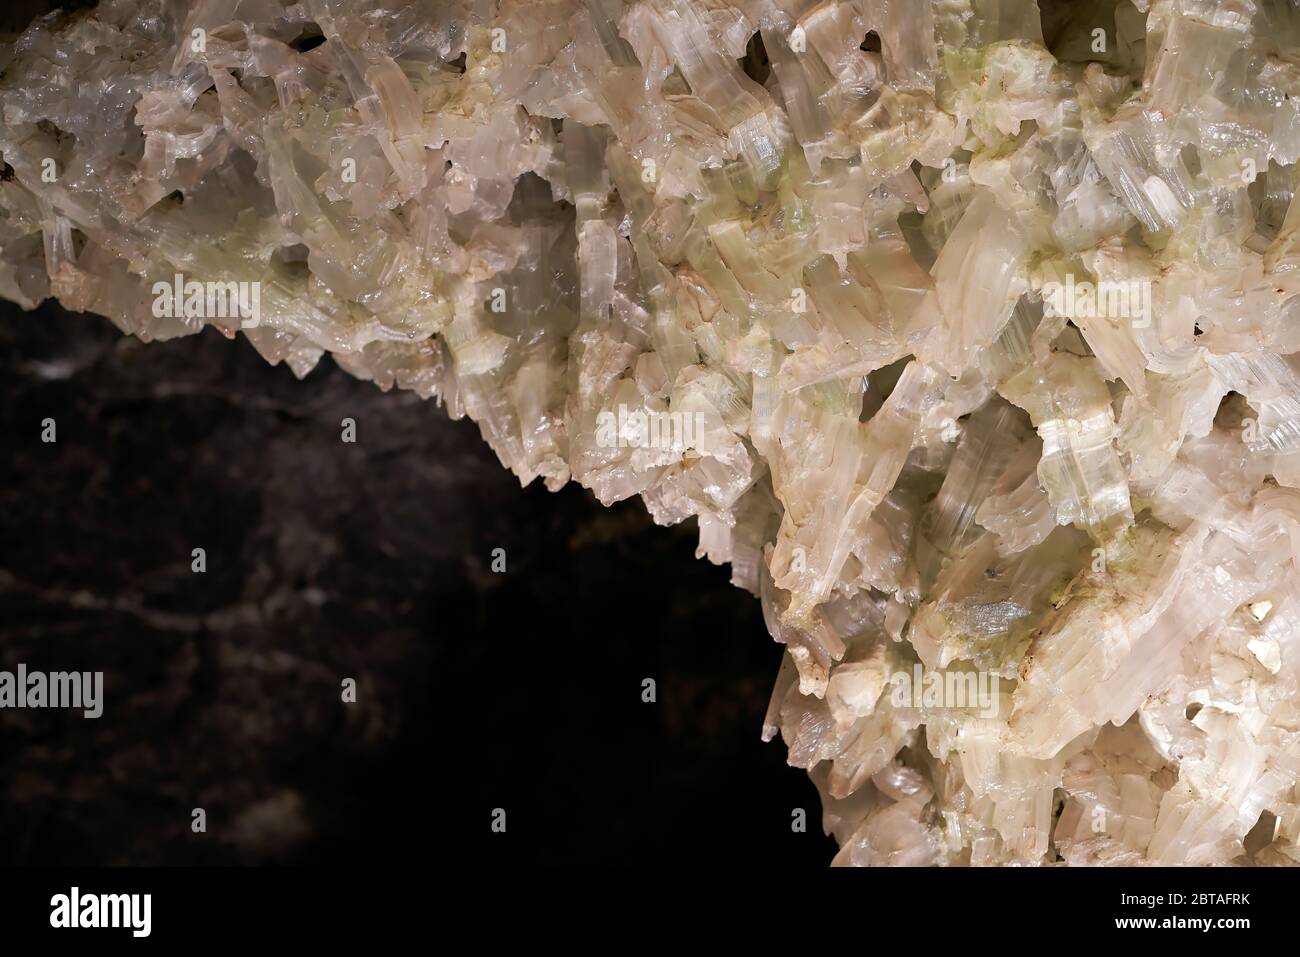 Gypsum crystals in a cave in the Thuringian Forest in Germany Stock Photo